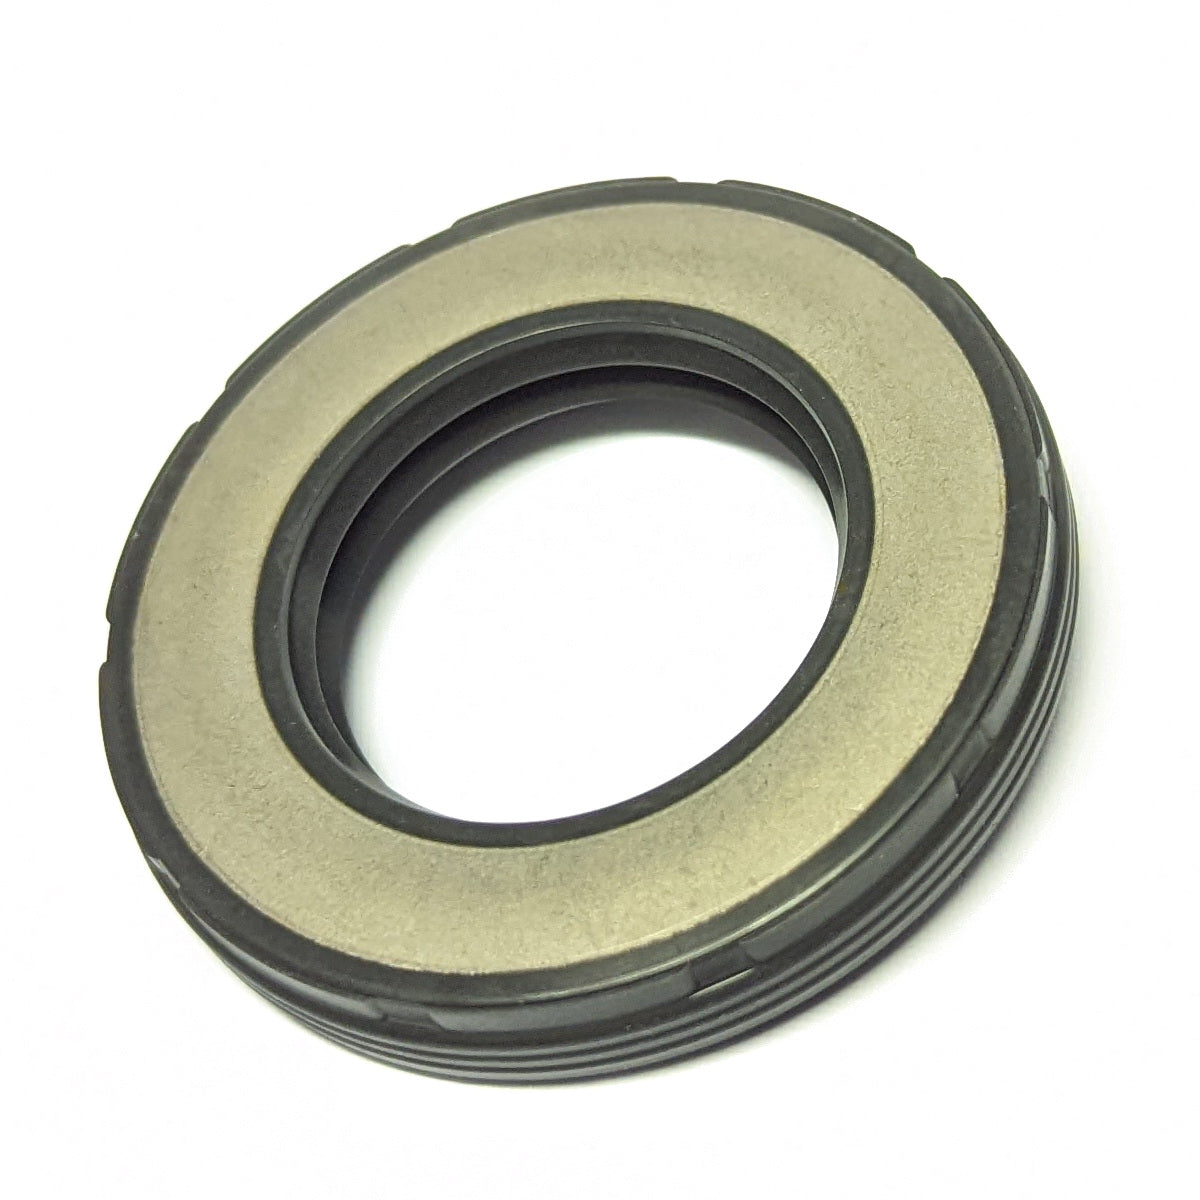 Aftermarket Sea Doo 2019+ Jet Pump Oil Seal - 271002071  (2 required)